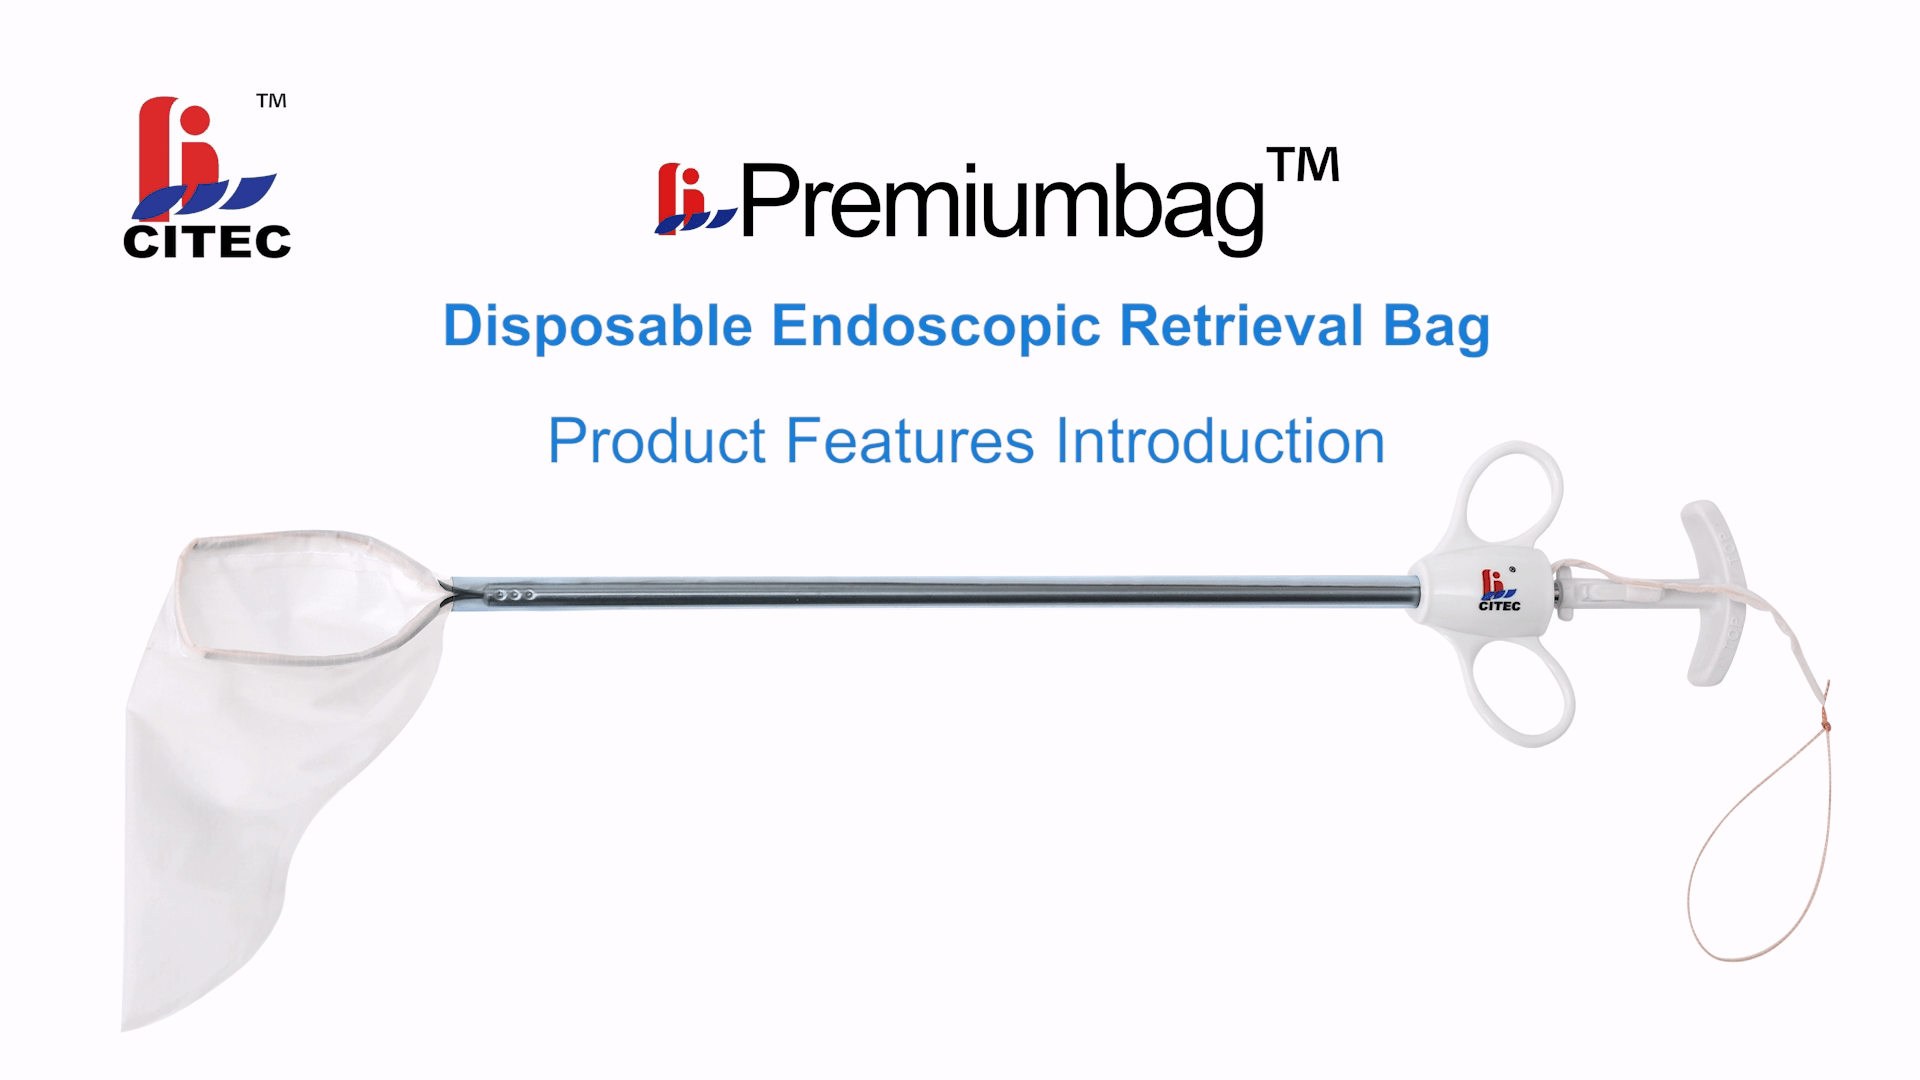 Premiumbag™ Disposable Endoscopic Retrieval Bag Product Features Introduction